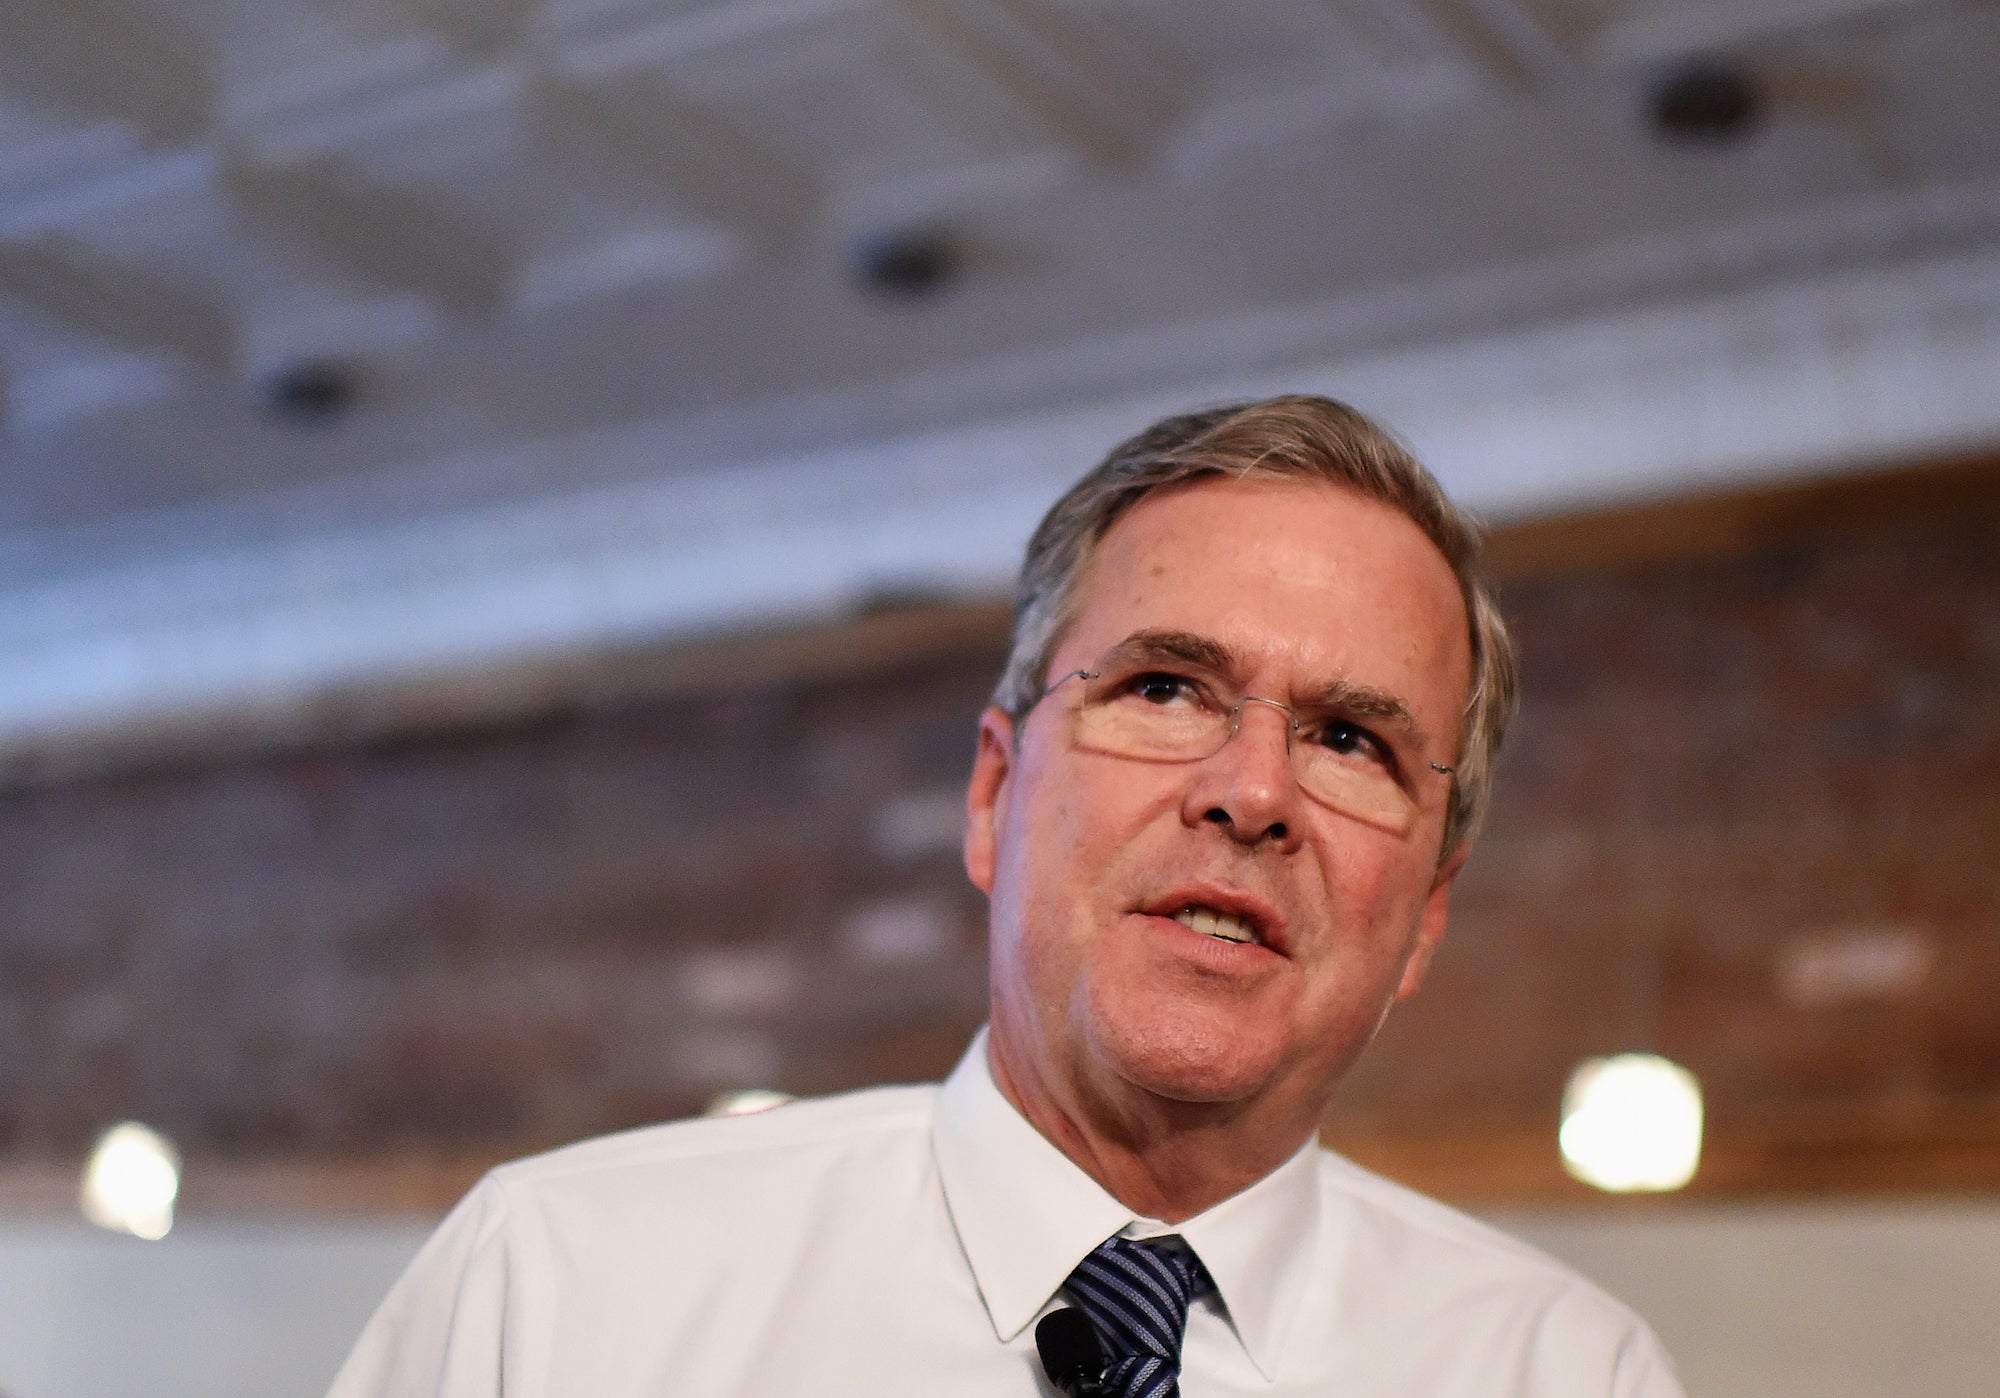 Jeb Bush will speak in New Hampshire today on keeping out Mexican drug cartels